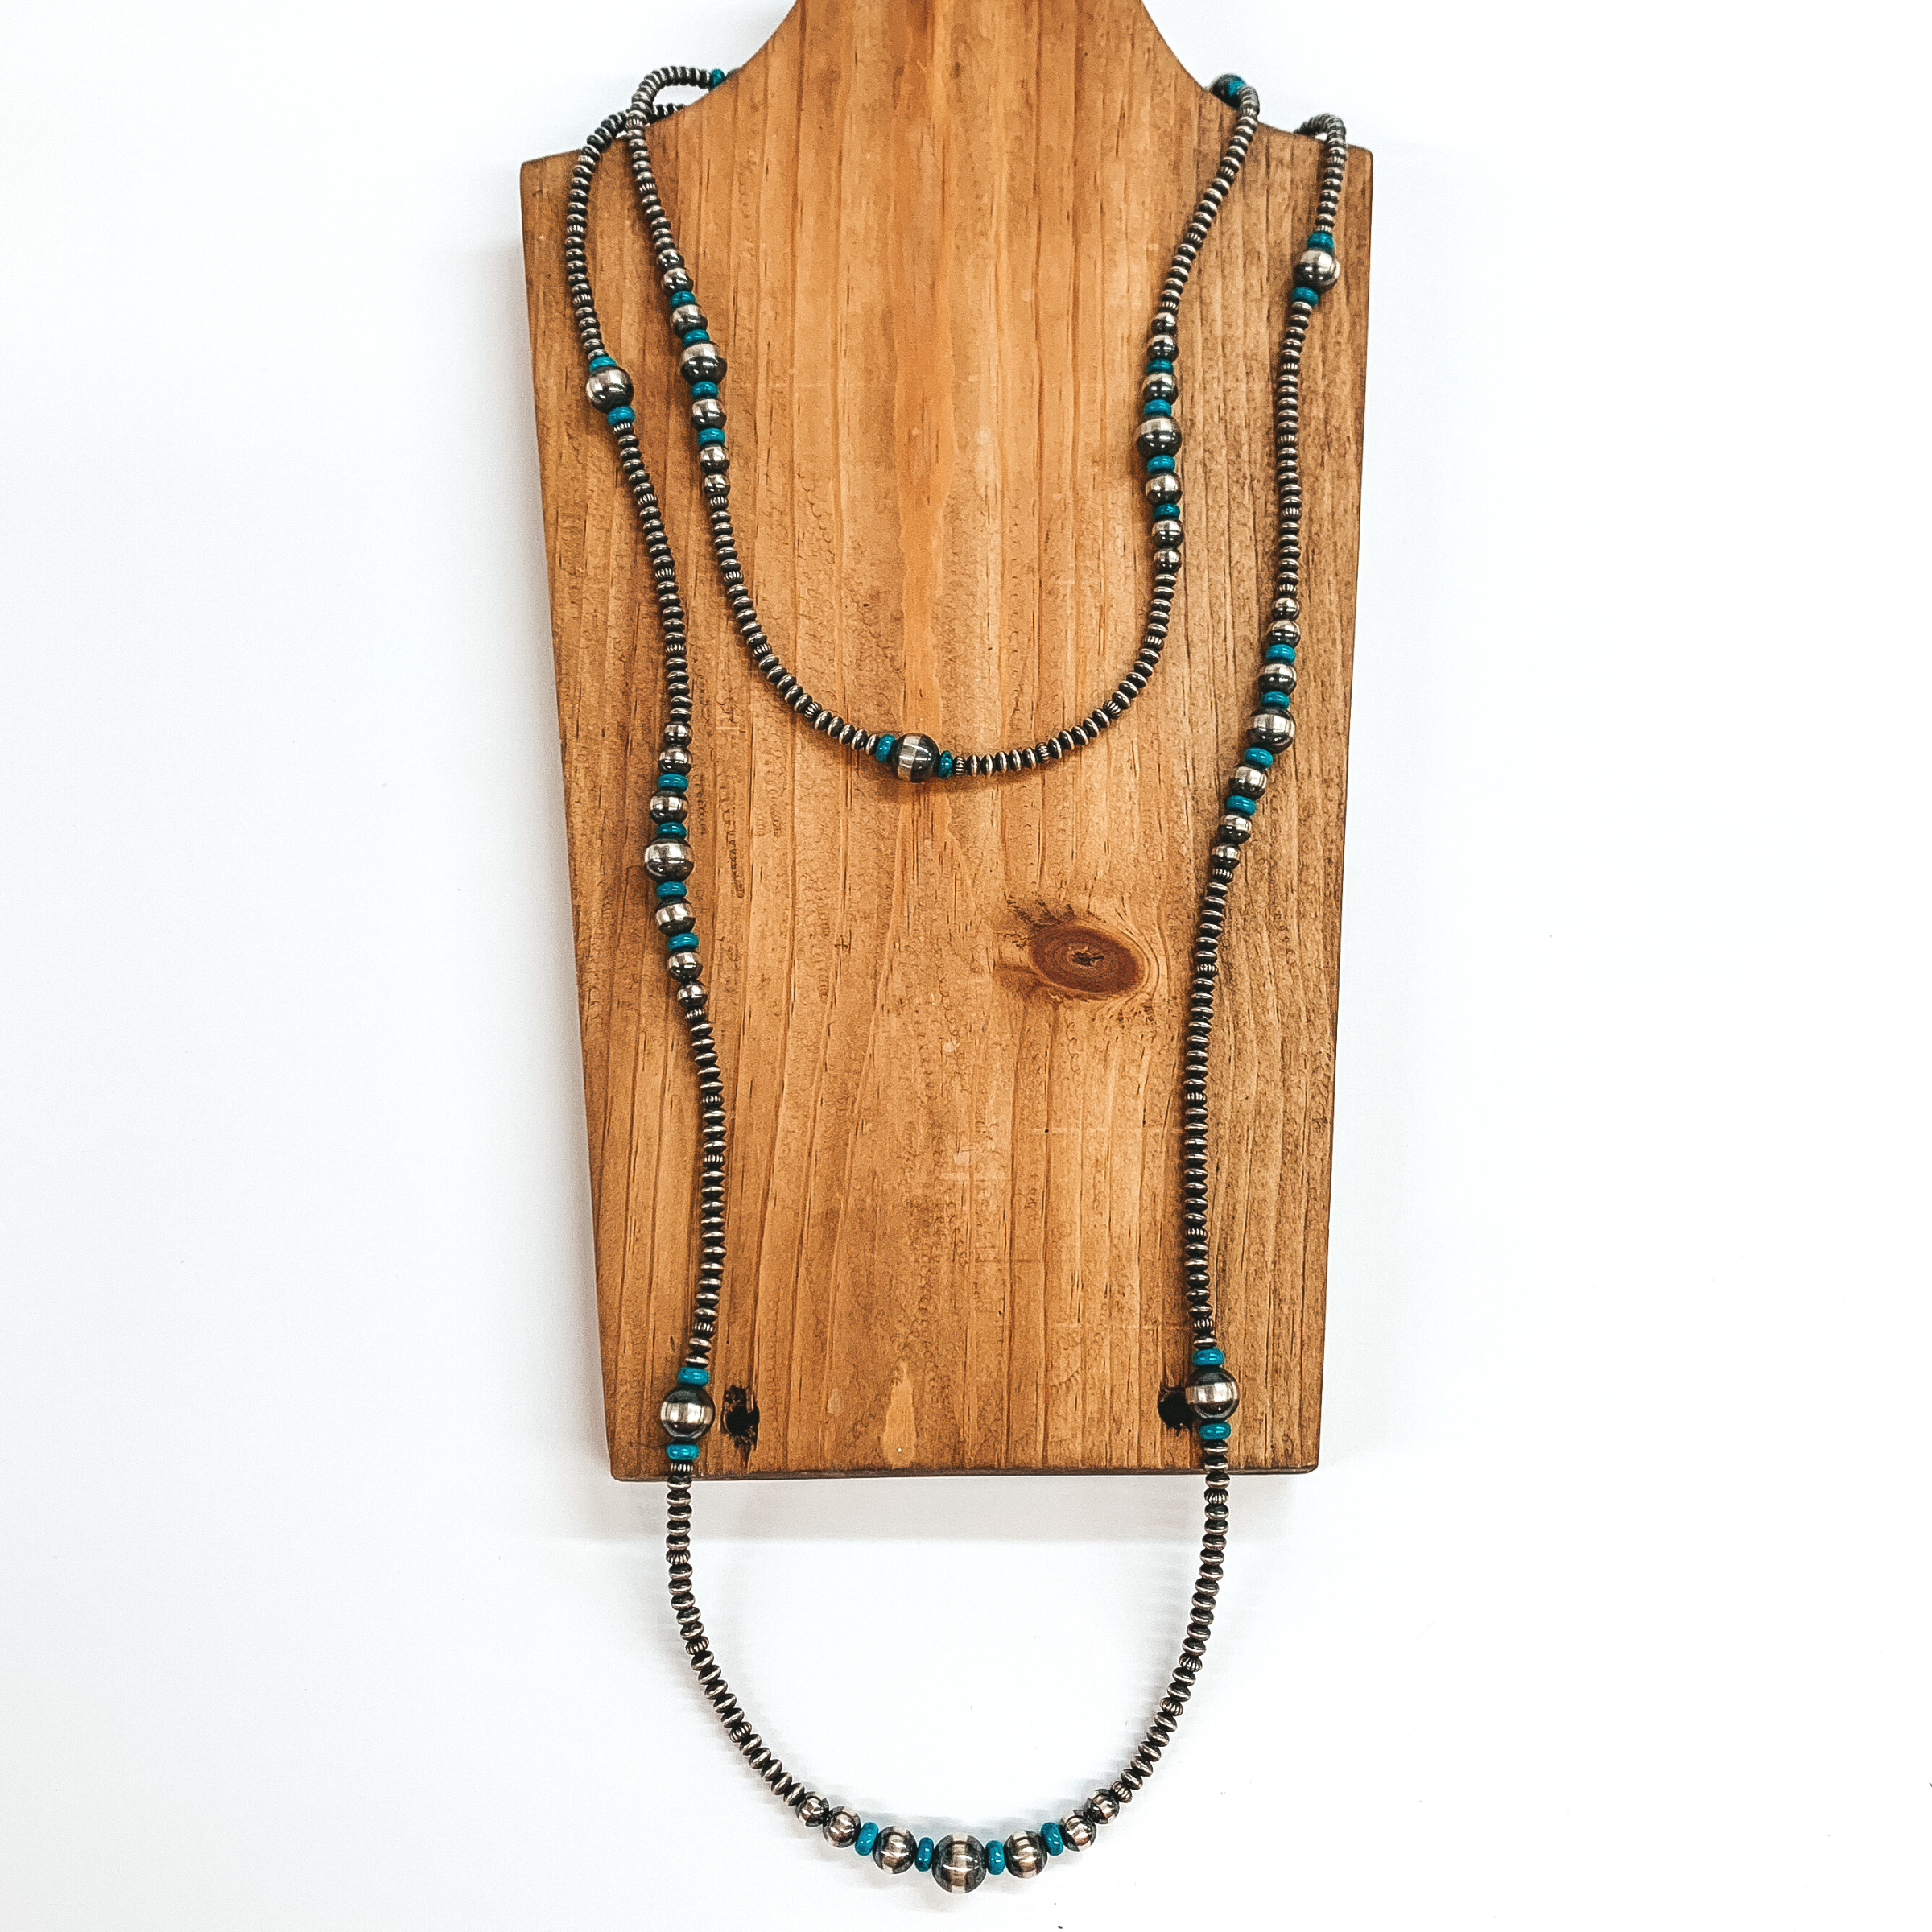 Silver saucer beaded necklace with turquoise stone spacers and graduated silver beads. This necklace is pictured laying on a wood necklace holder on a white background.